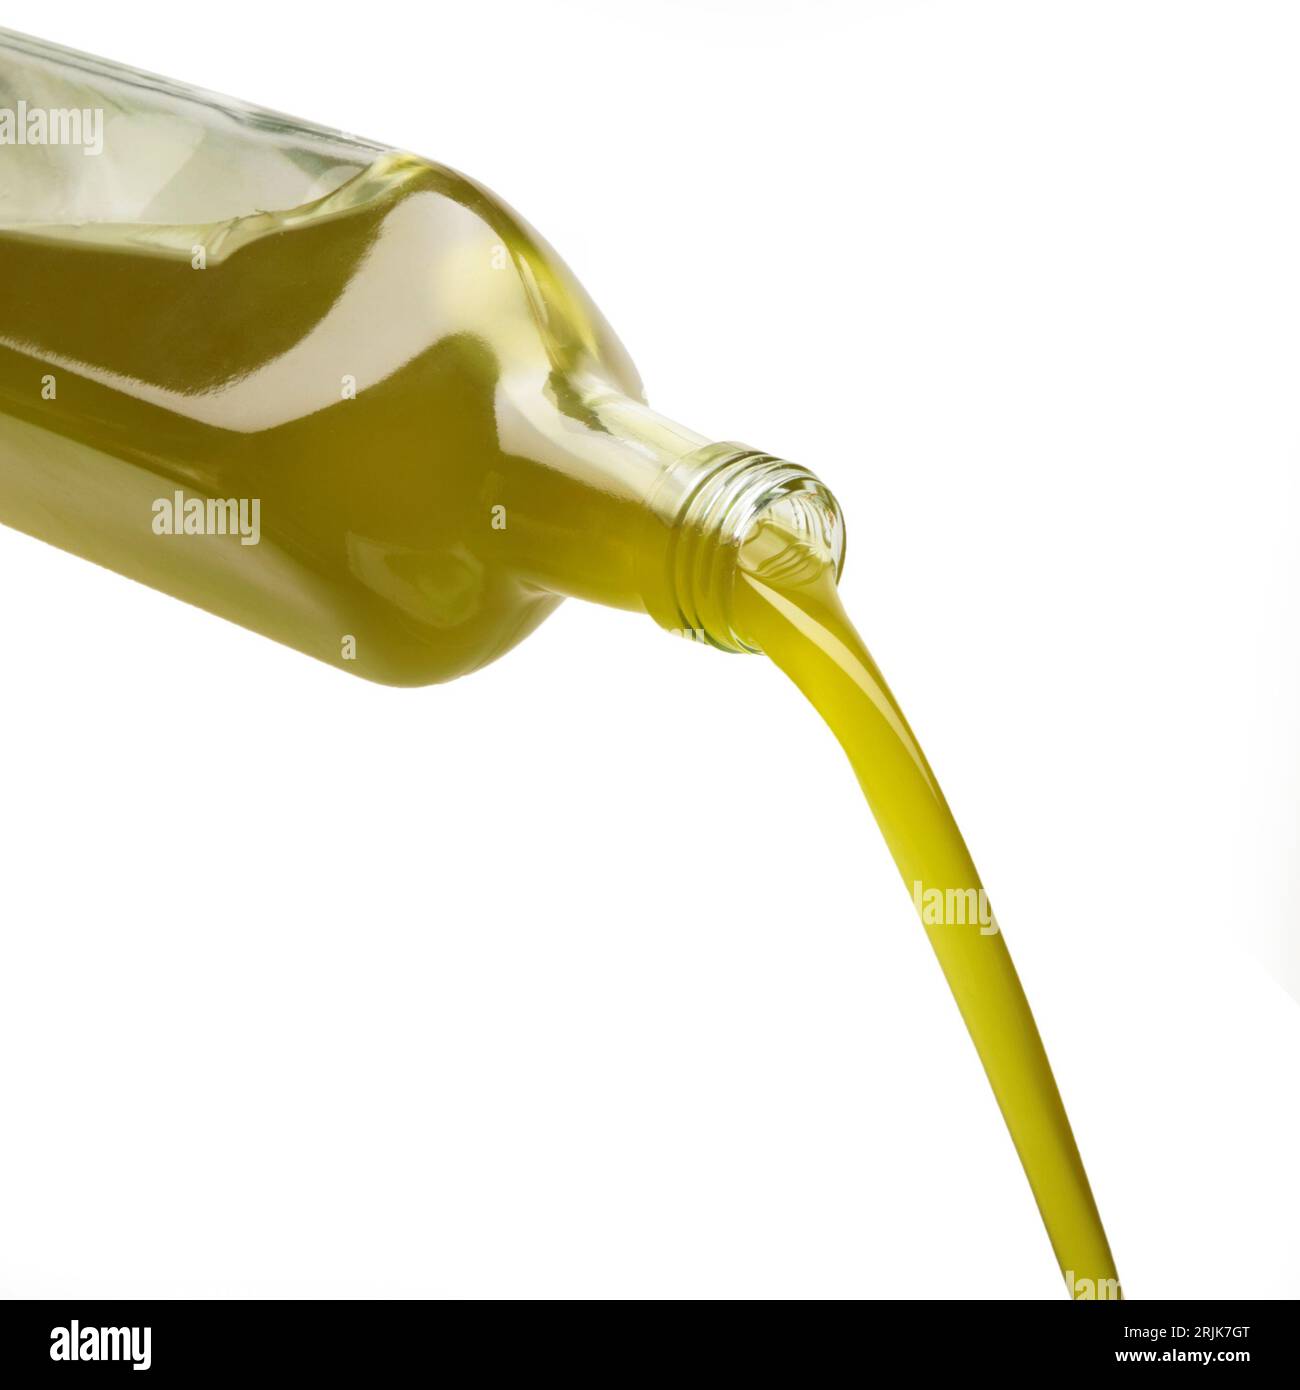 Extra virgin olive oil bottle Cut Out Stock Images & Pictures - Alamy